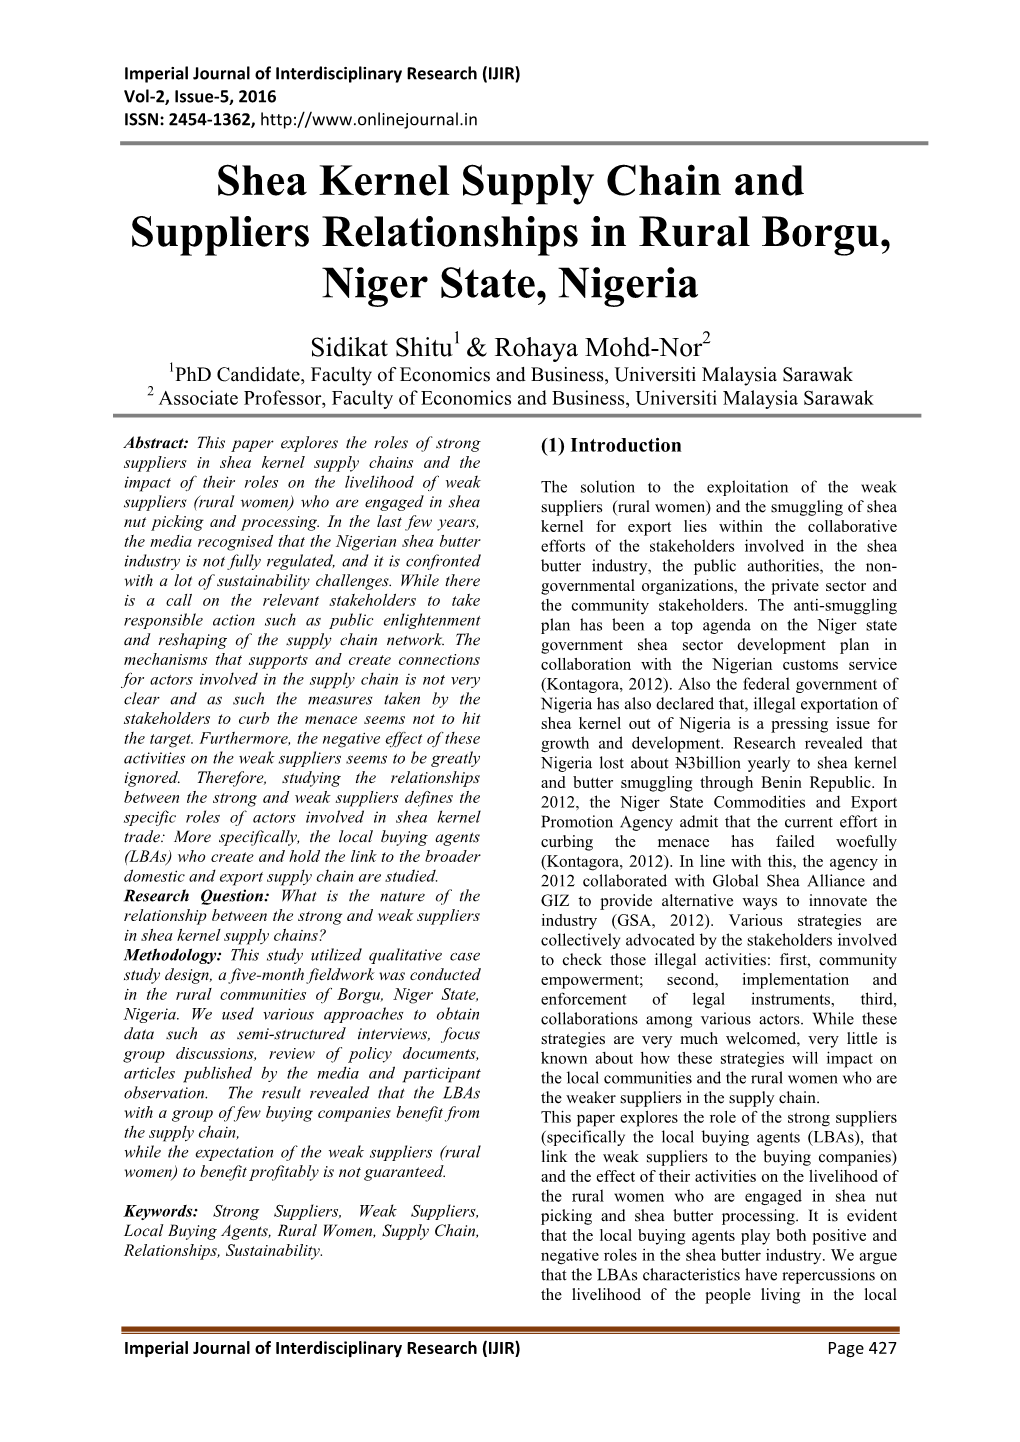 Shea Kernel Supply Chain and Suppliers Relationships in Rural Borgu, Niger State, Nigeria